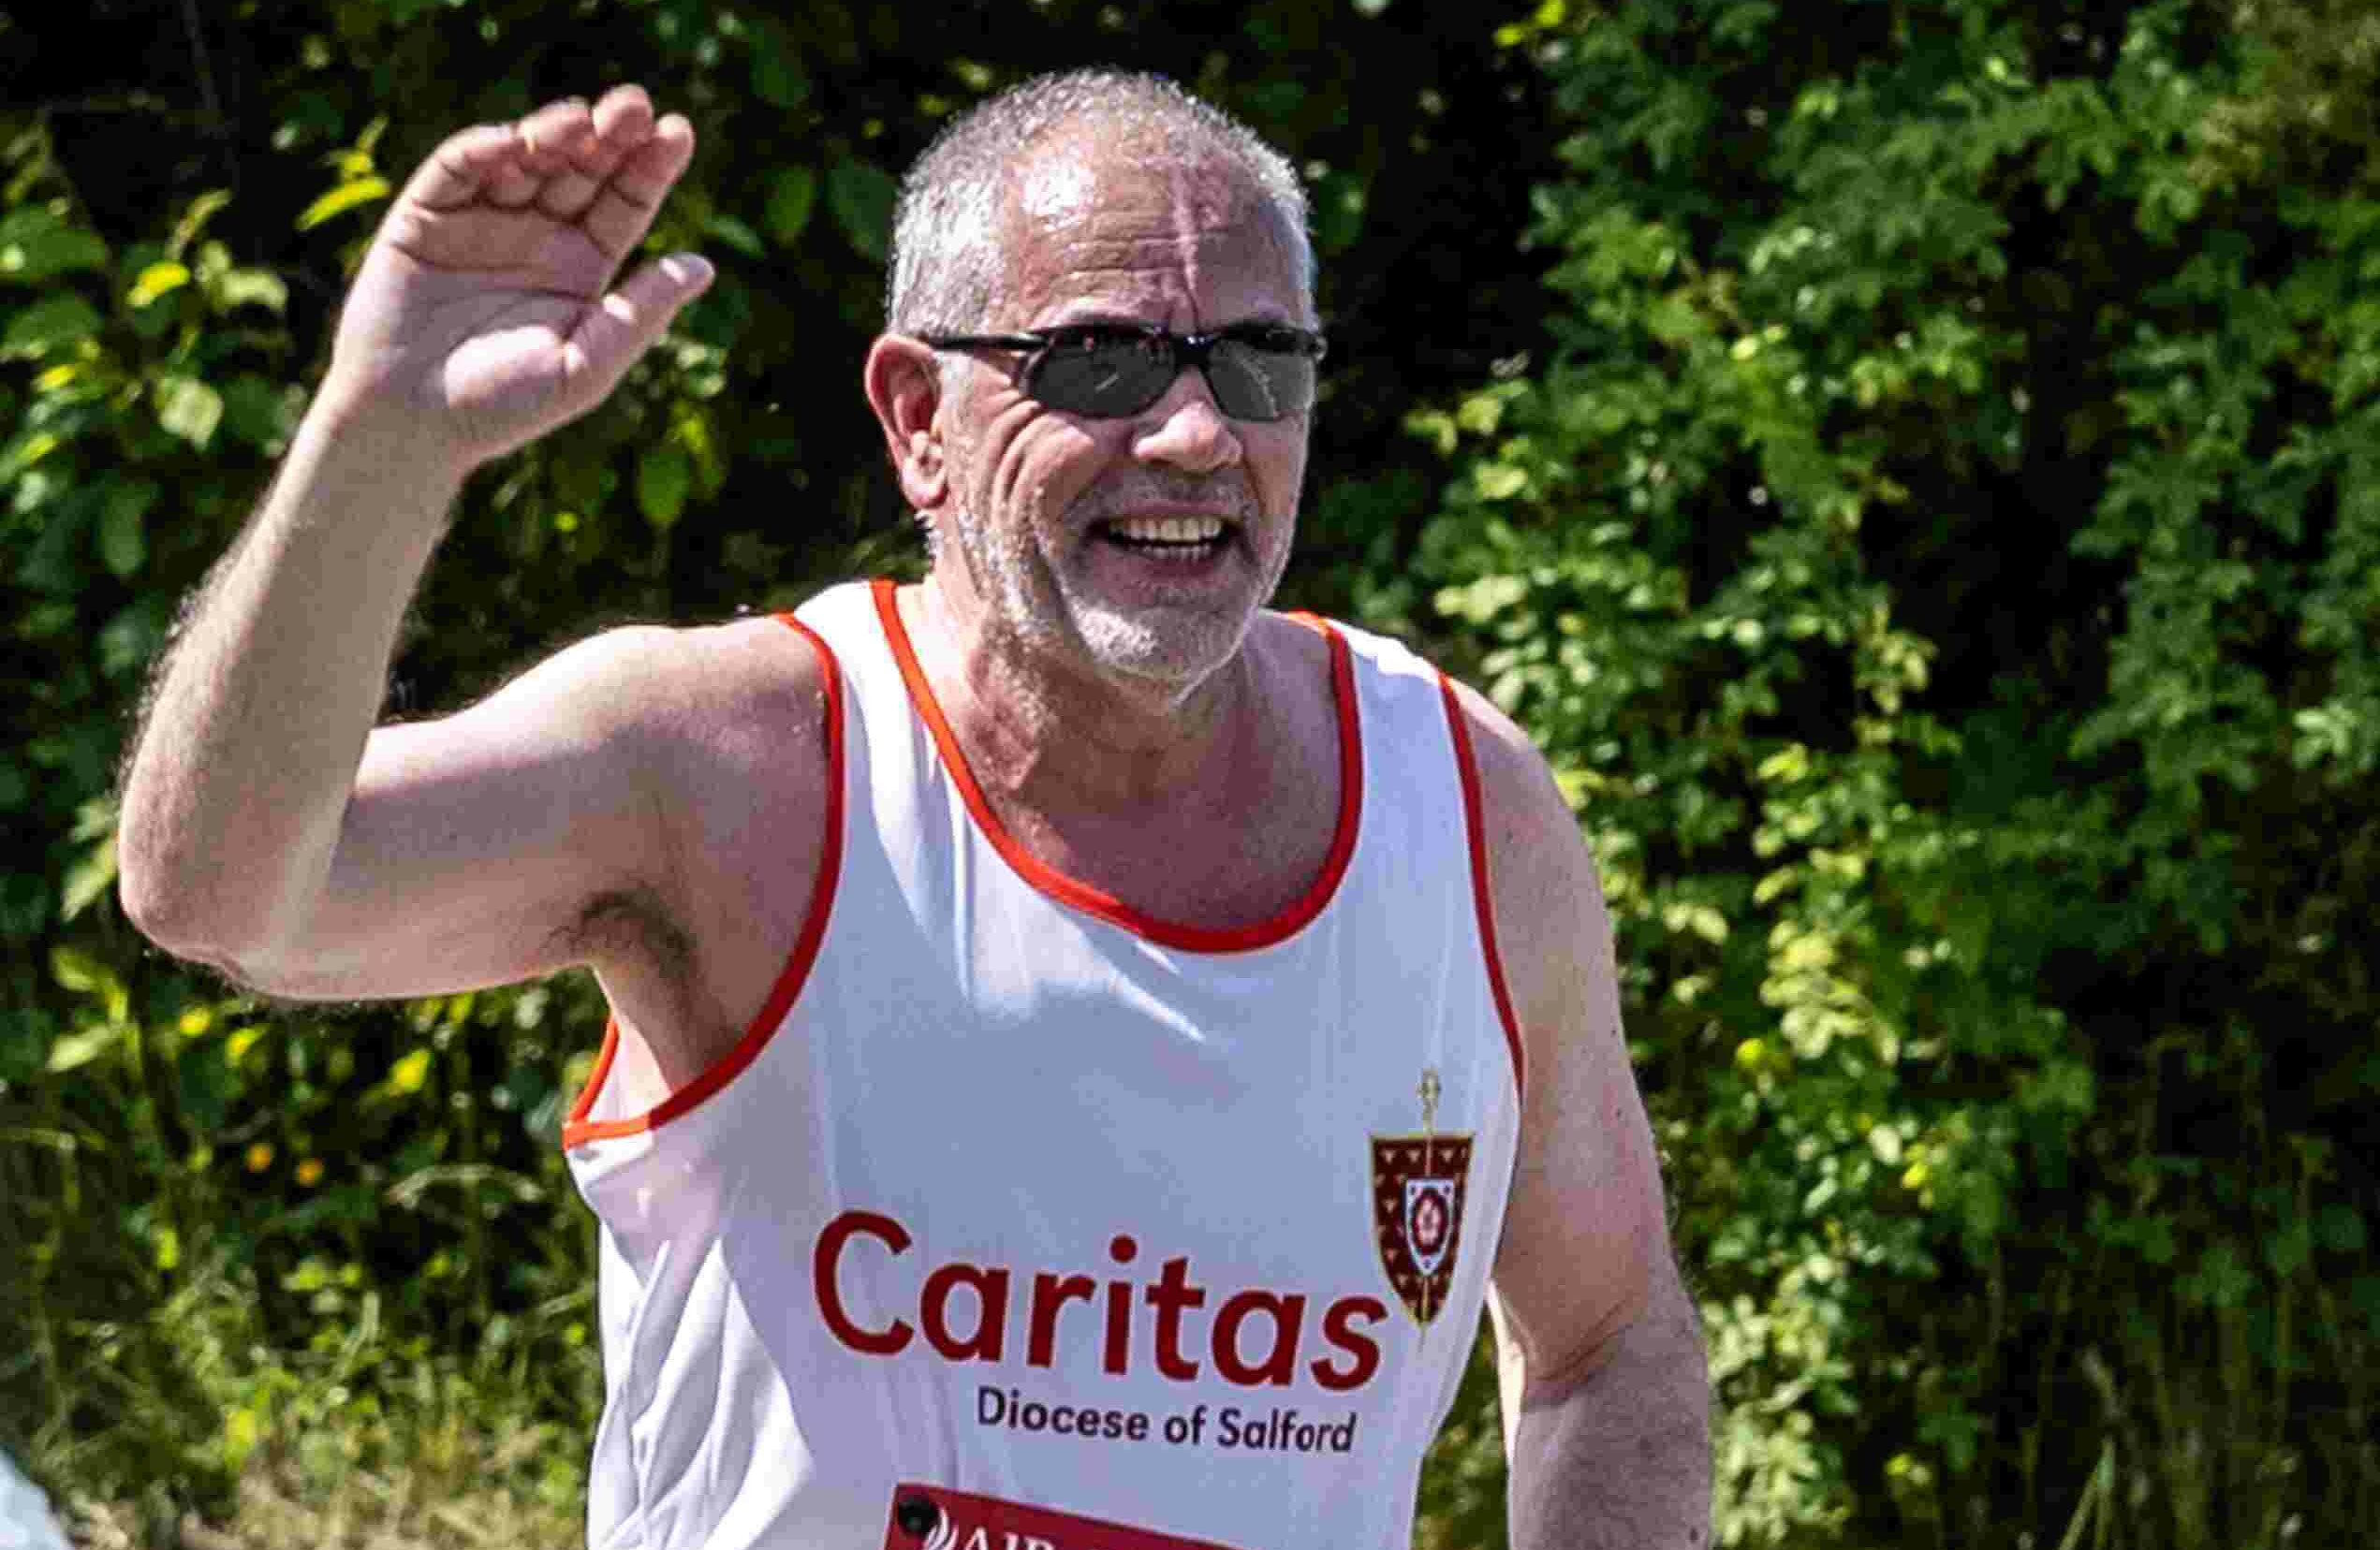 Man running in white vest with Caritas logo on it, waving at camera